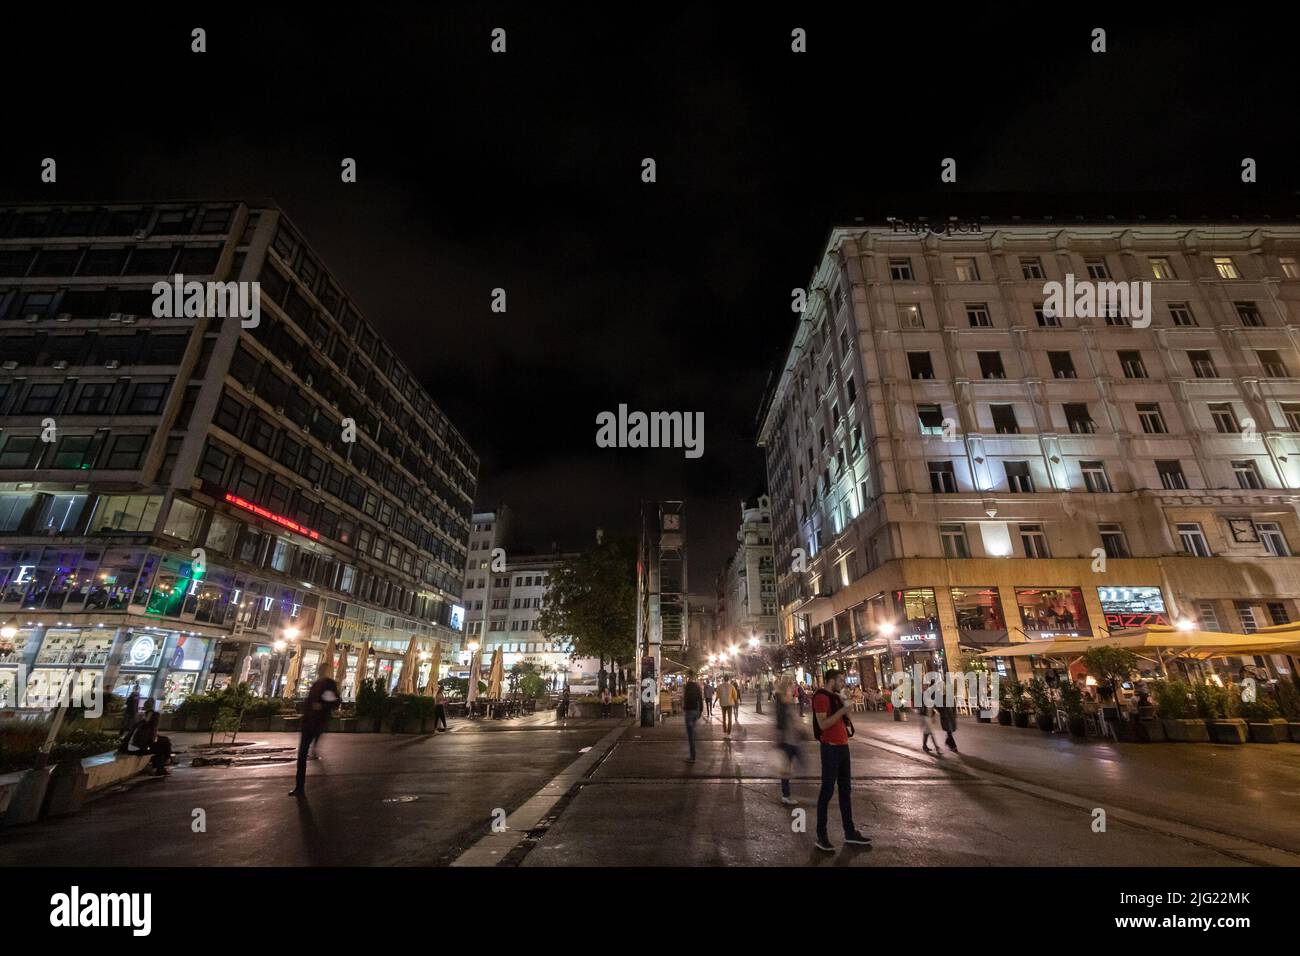 Picture of Trg Republike, also called republic square with people passing by and waiting at night in Belgrade, Serbia. Republic Square or Square of th Stock Photo